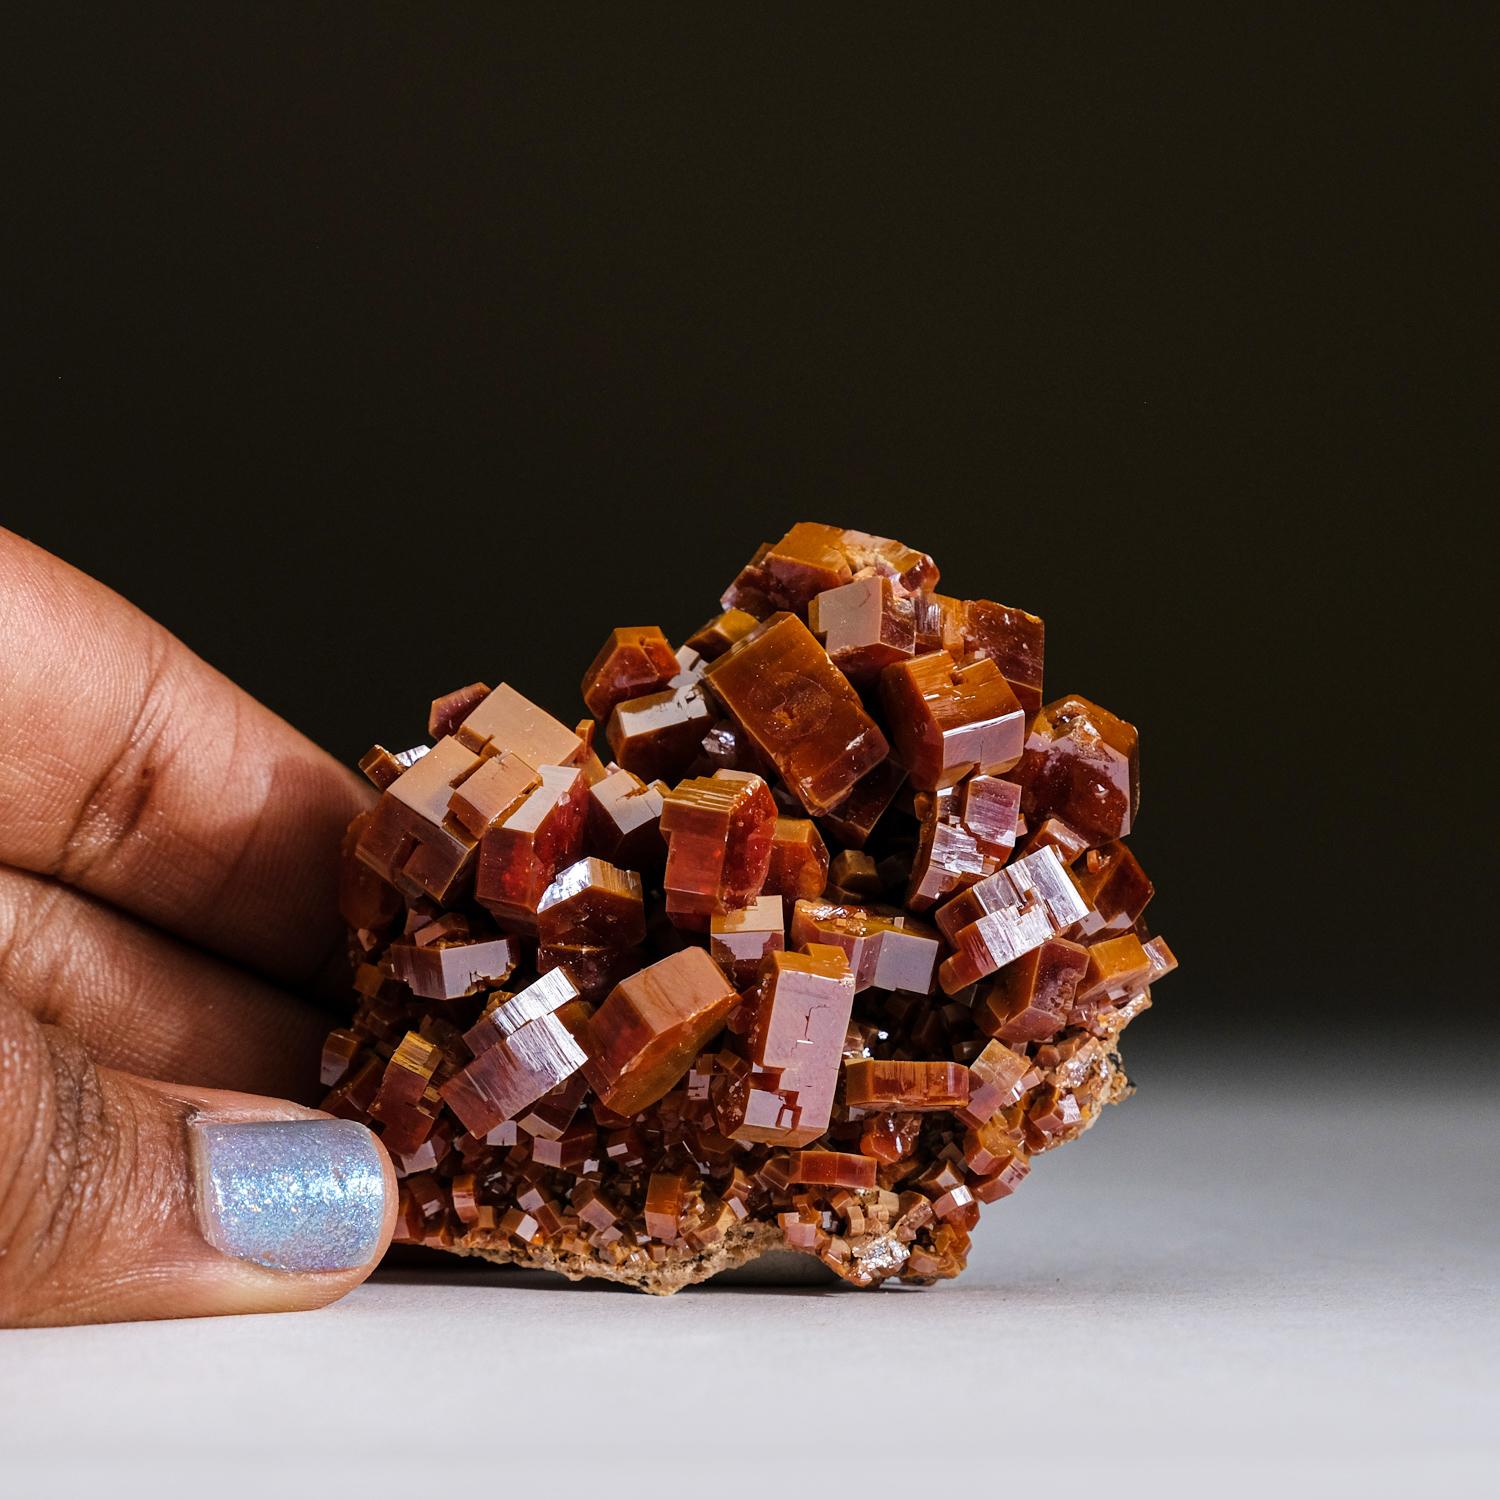 Moroccan Genuine Vanadinite Crystal Cluster on Matrix from Morocco (148.1 grams) For Sale